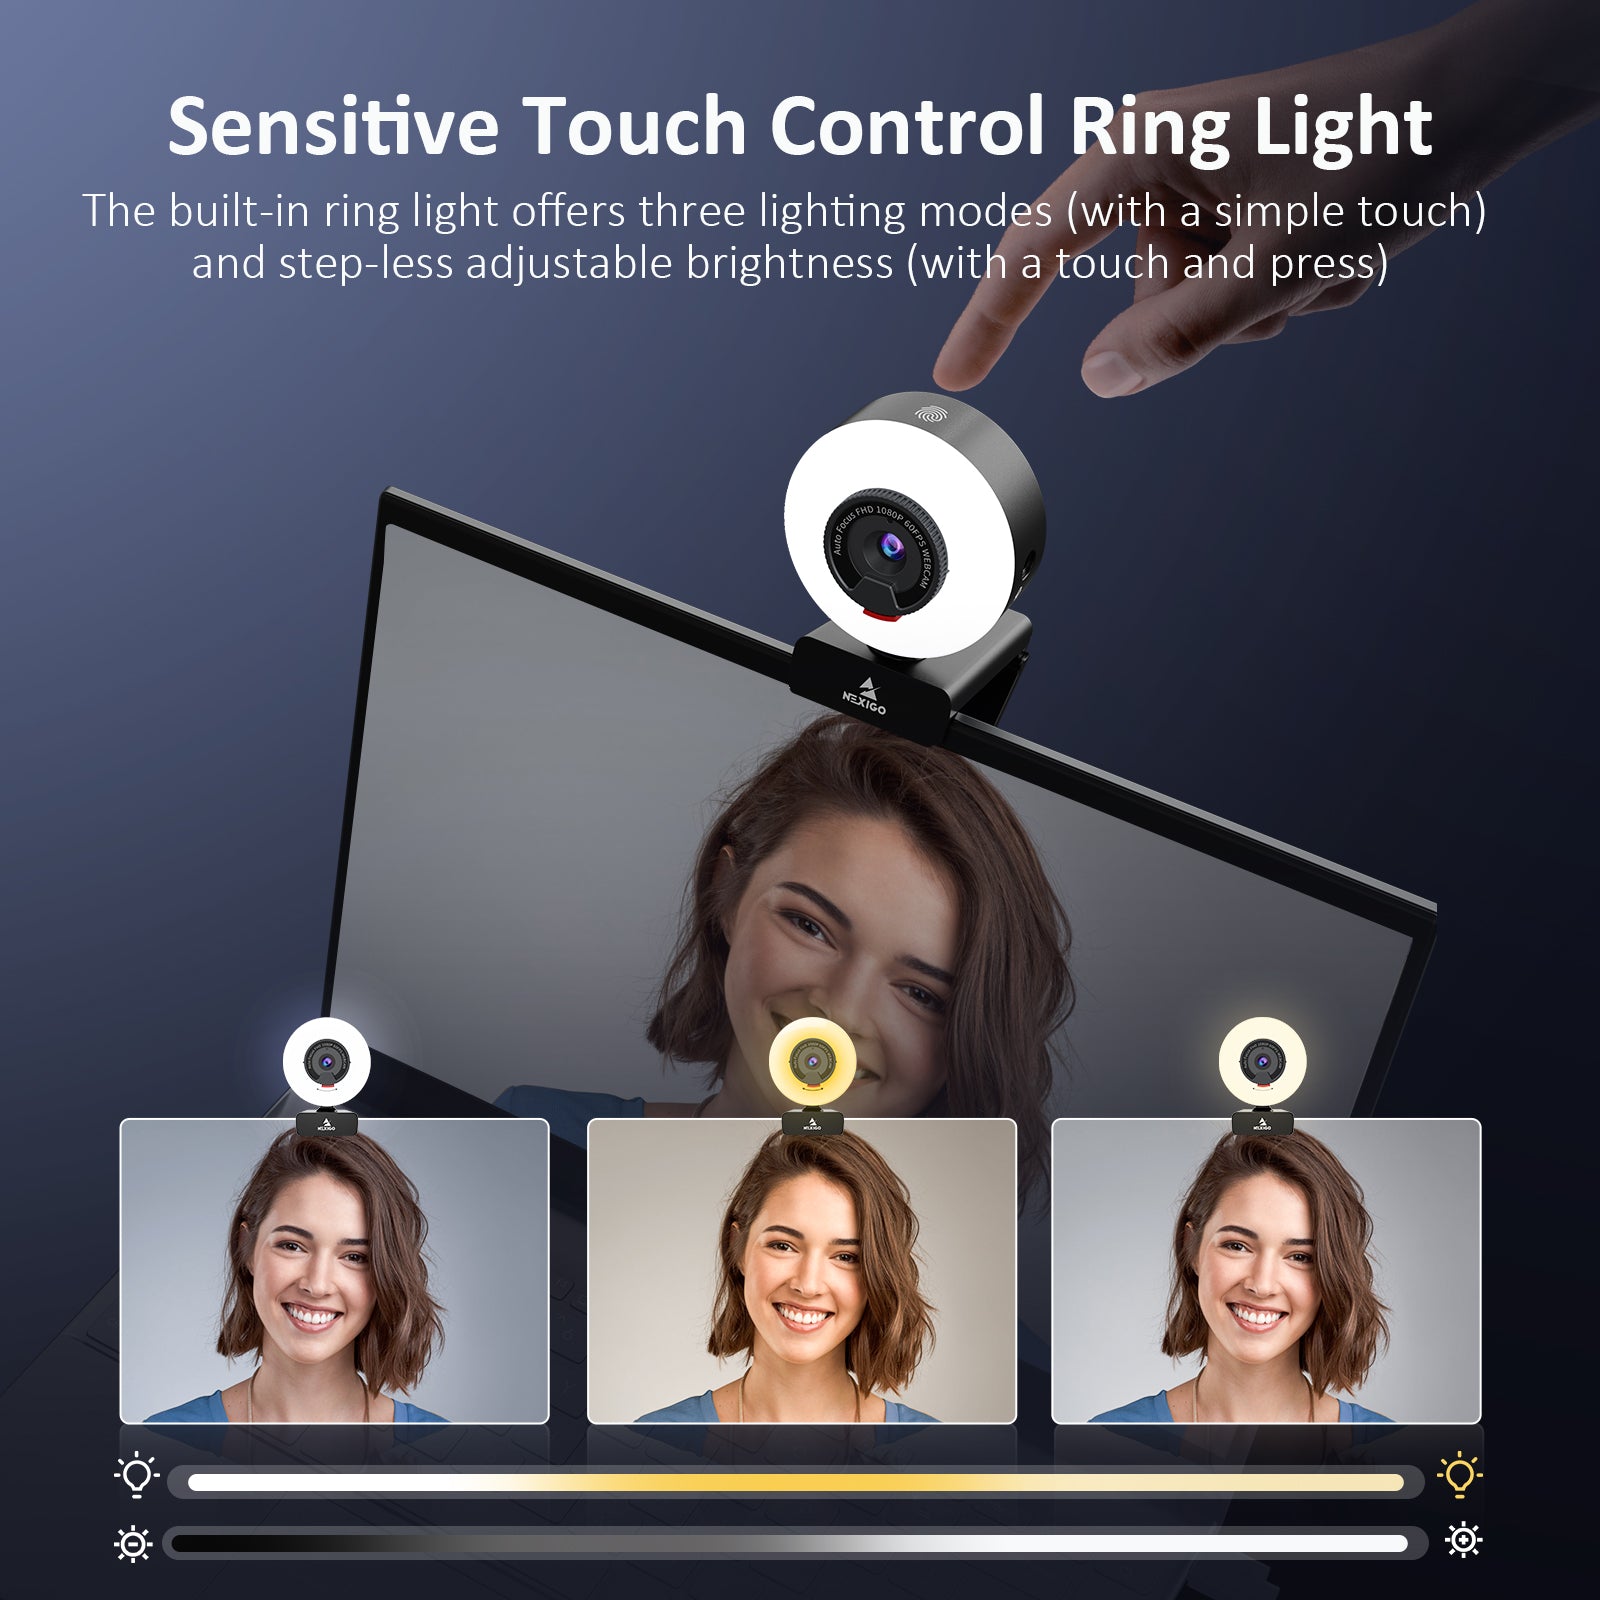 The webcam has touch buttons on the top to control the lighting mode and brightness